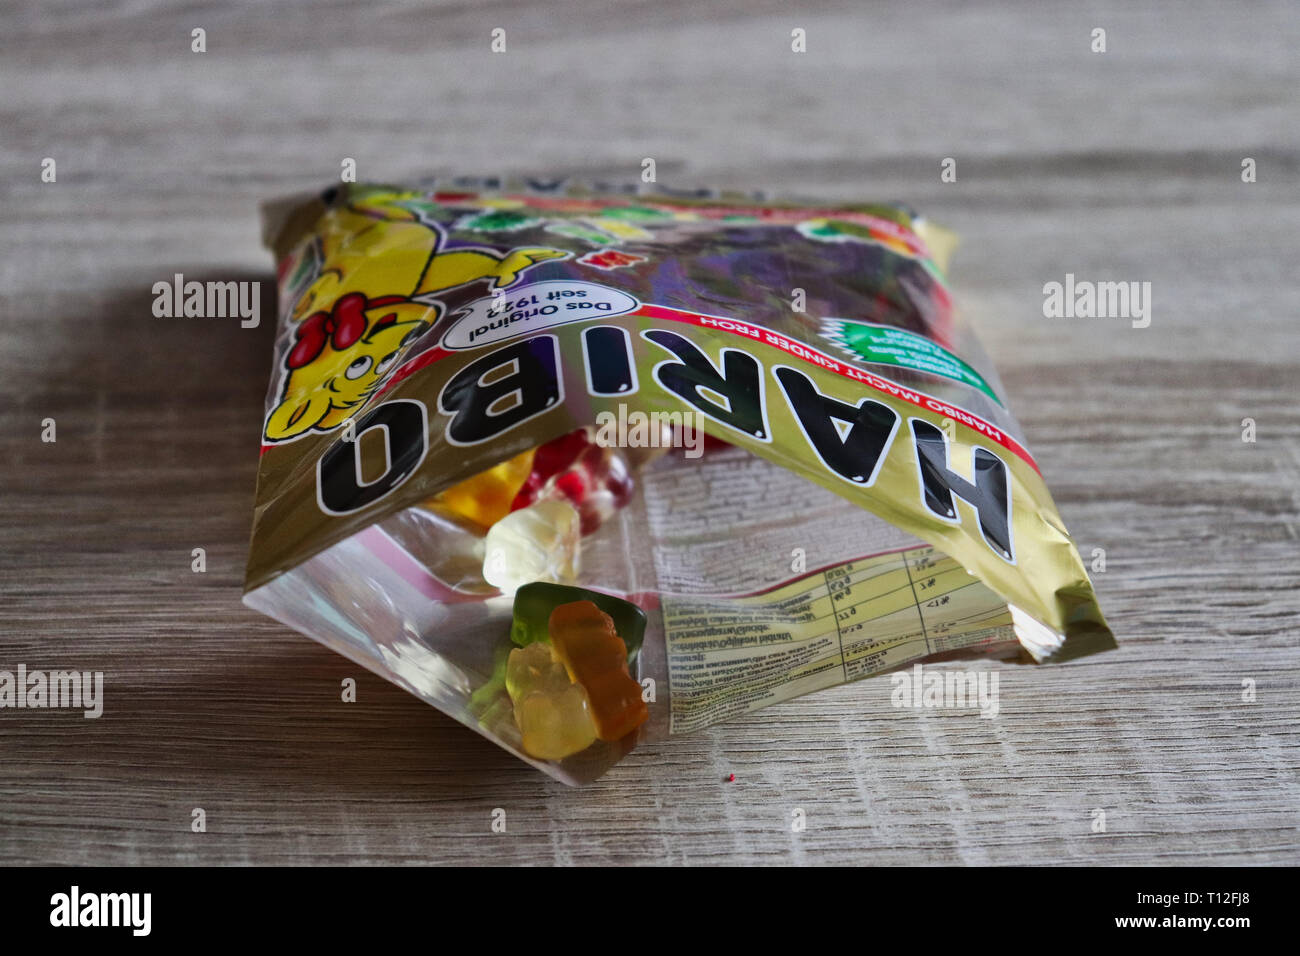 An open pack of Haribo sweets on a wooden table. Stock Photo